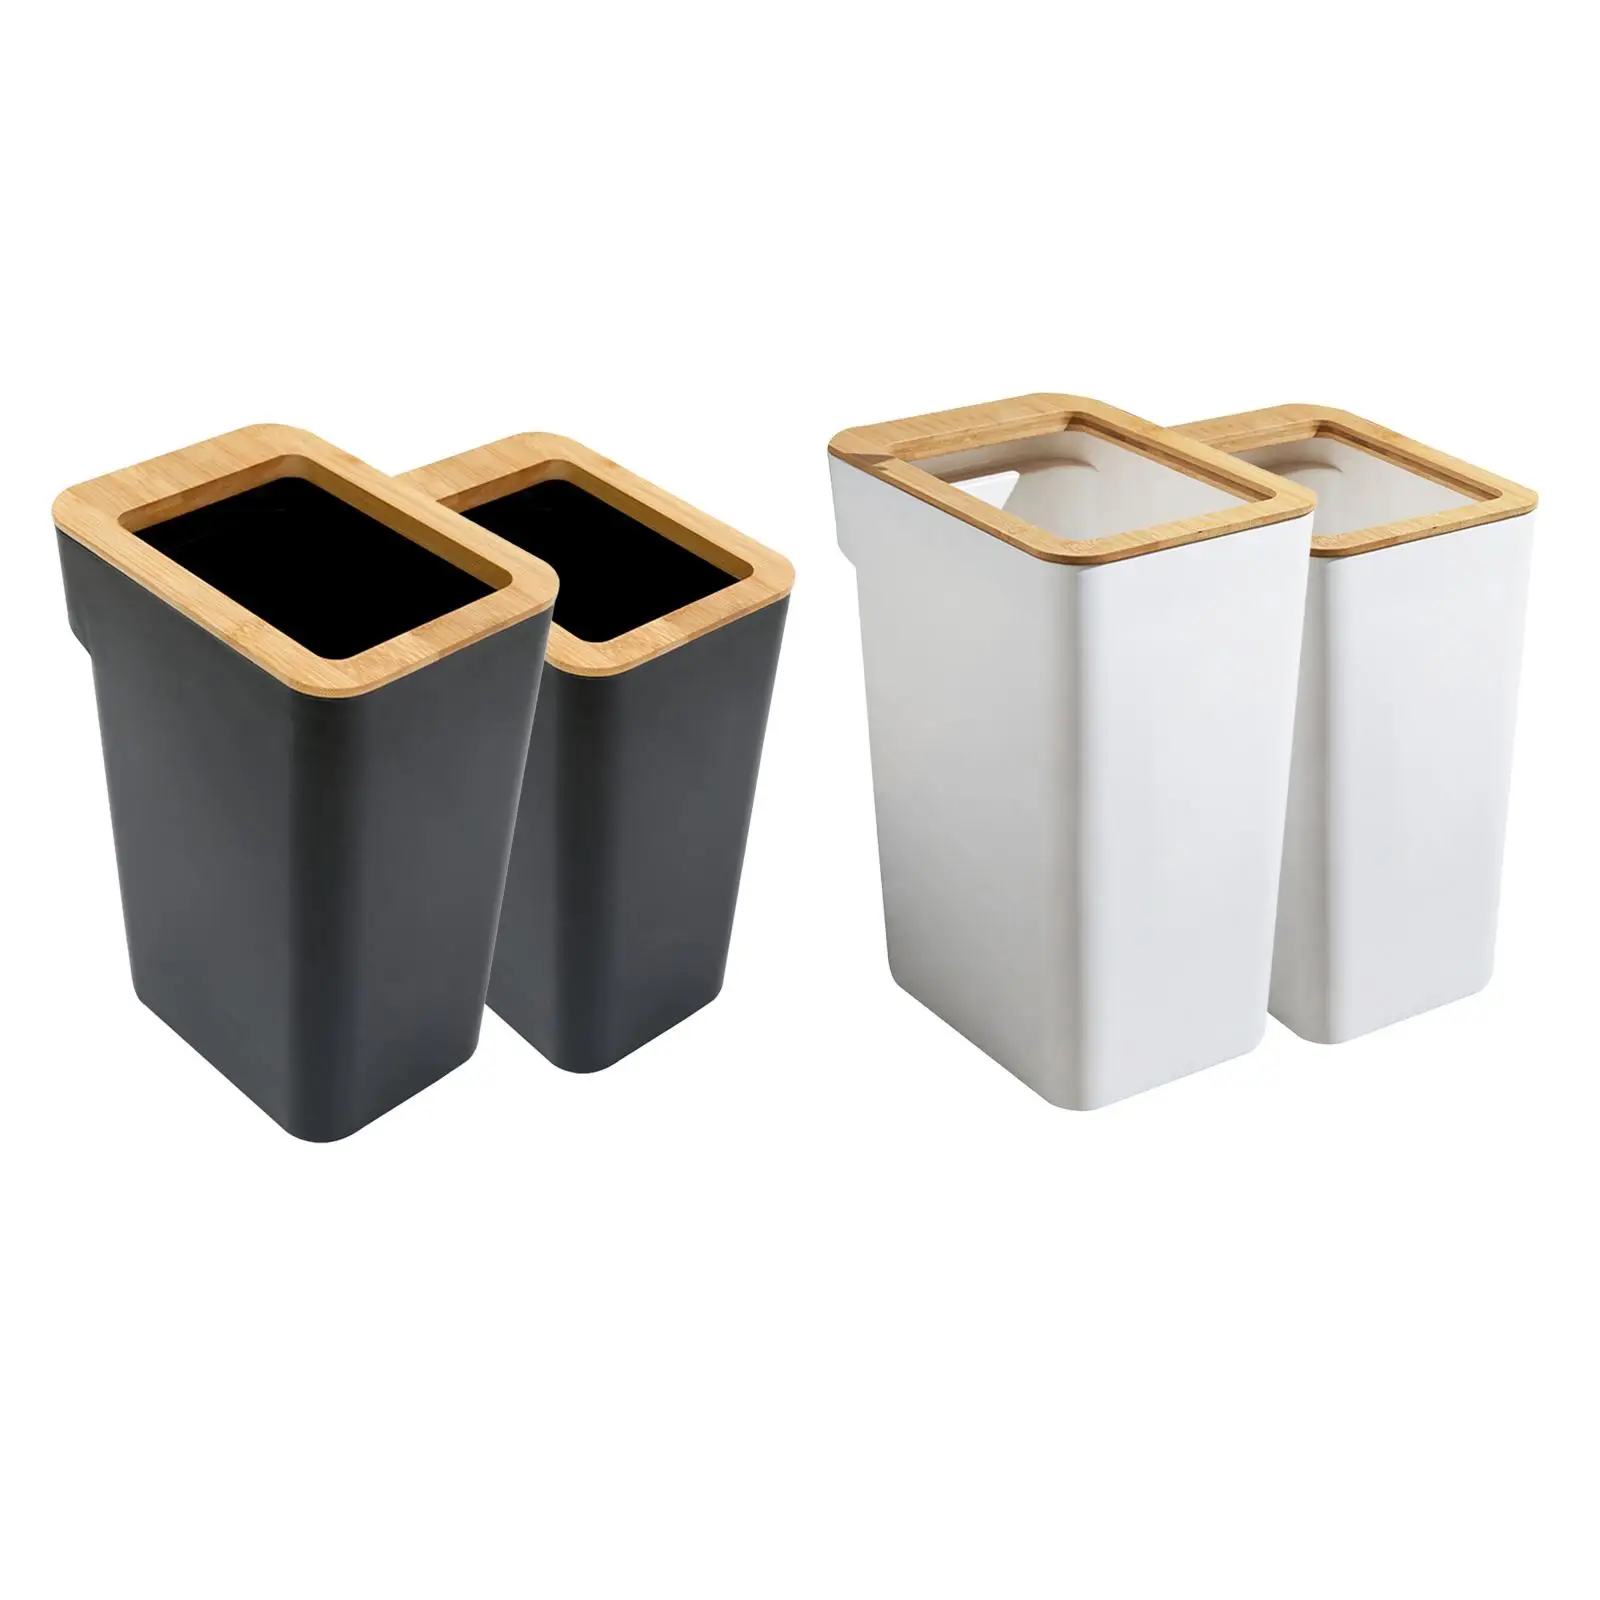 Modern Trash Can Garbage Container Without Lid Waste Bins Rubbish Can Trash Bin for Washroom Kitchen Home Office Bathroom